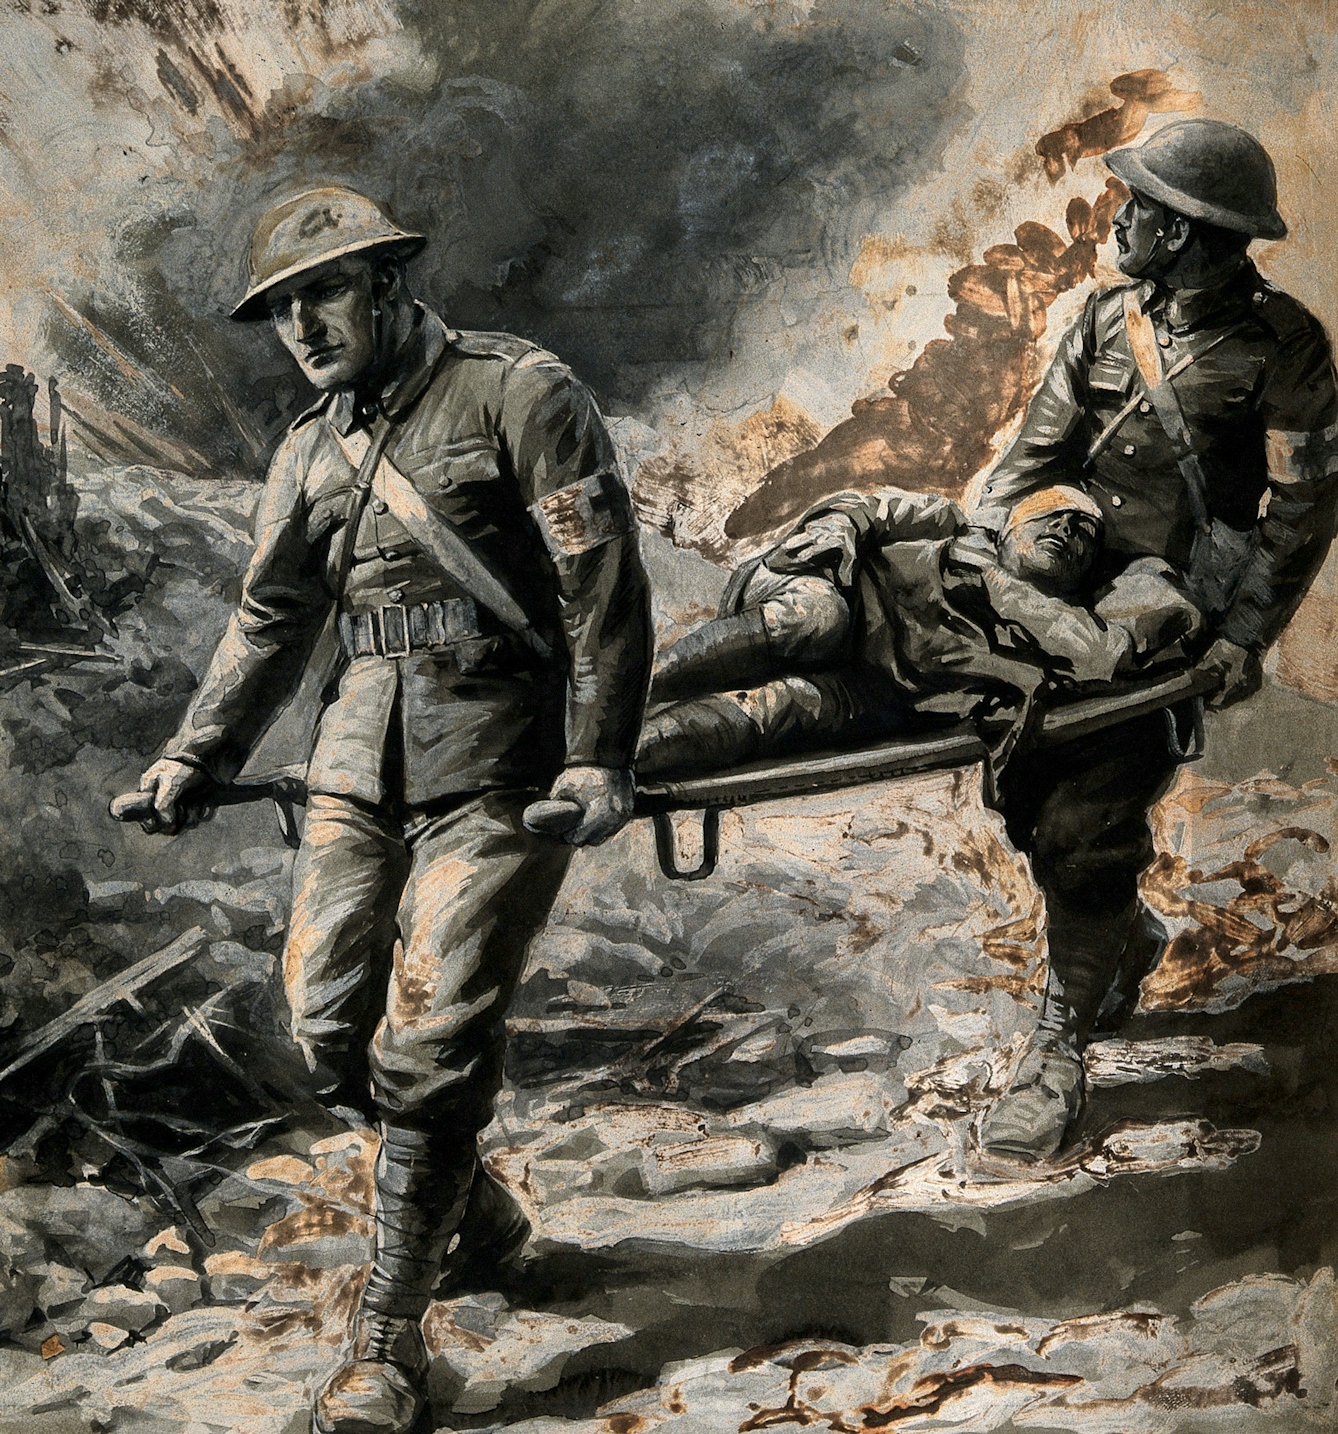 Colour painting showing two stretcher bearers removing a wounded man under fire, all in military dress.